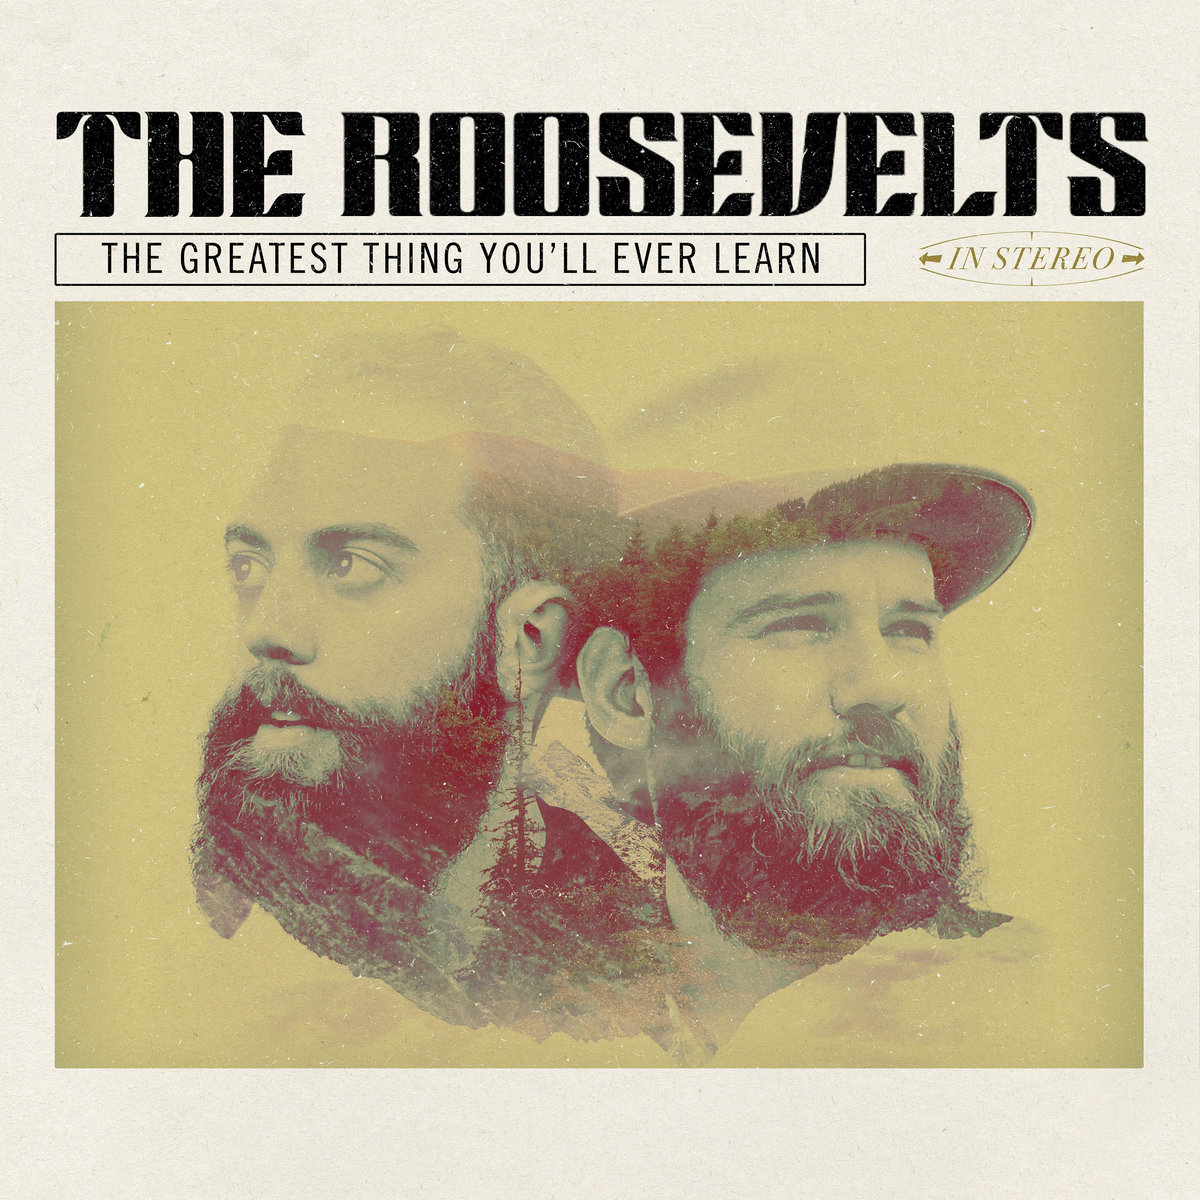 The Greatest Thing You'll Ever Learn - The Roosevelts